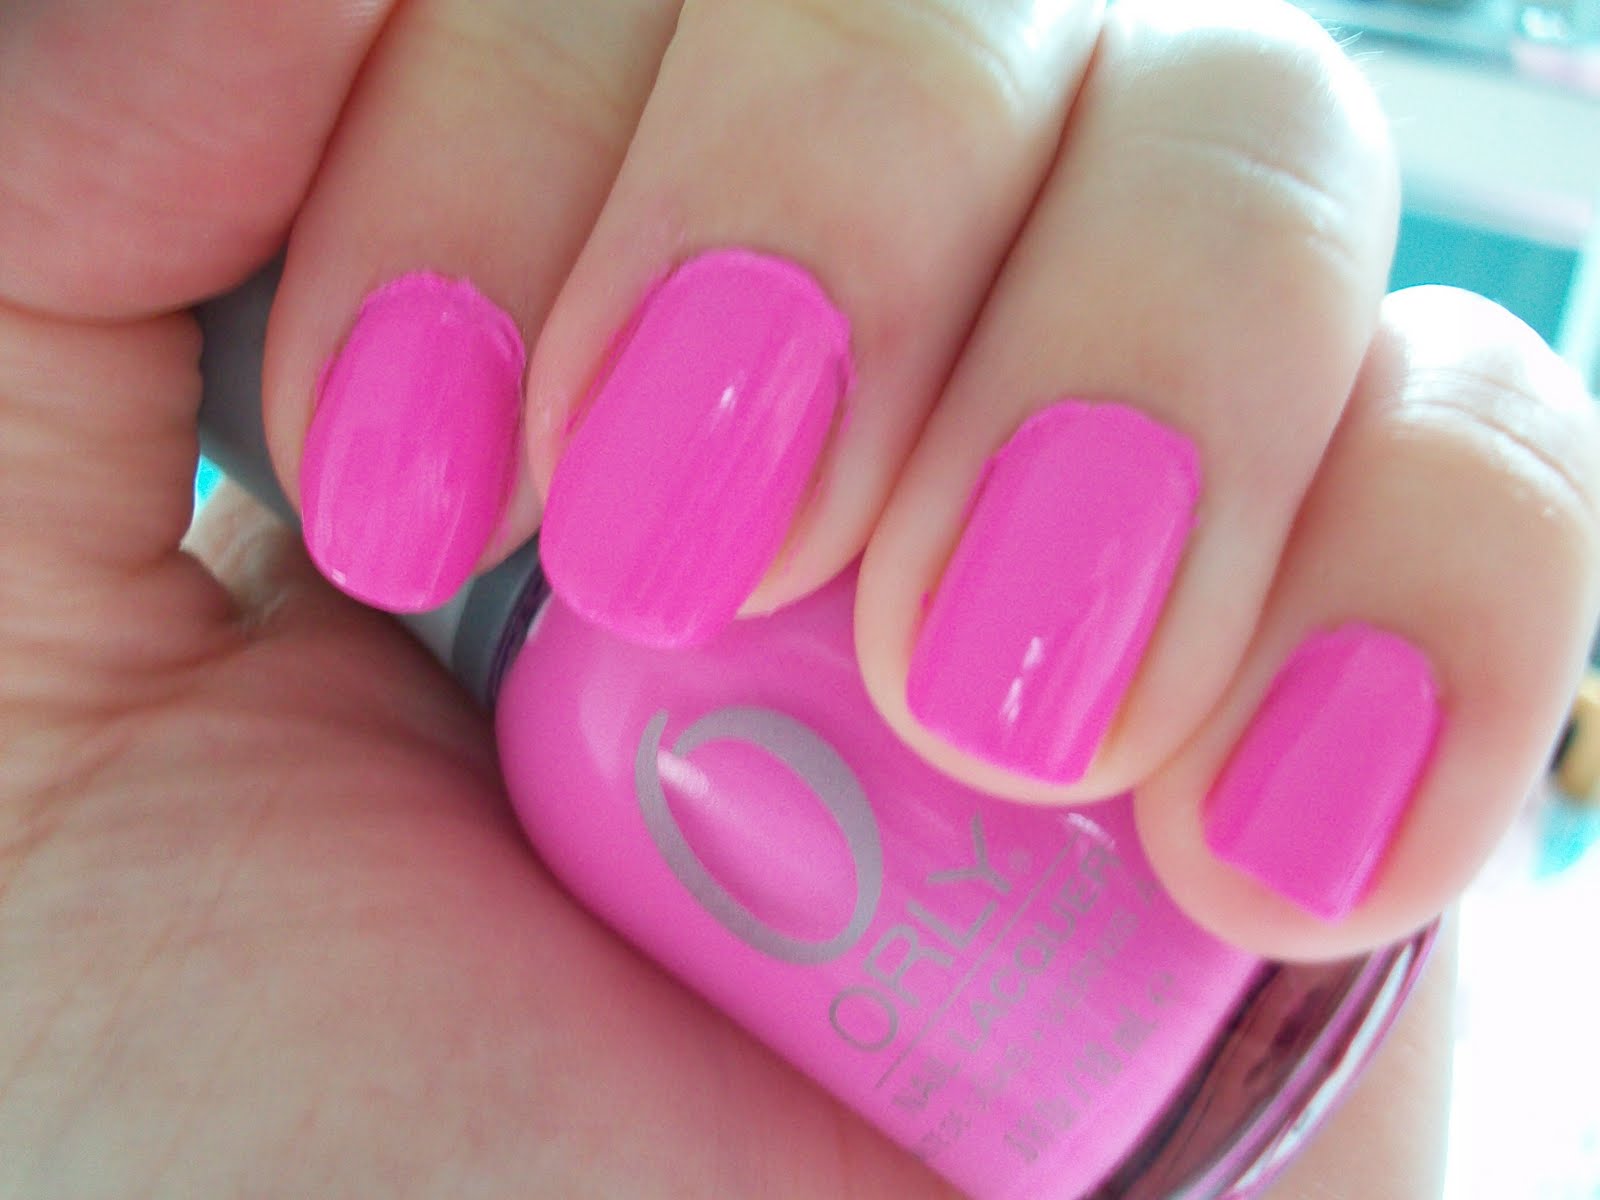 8. "Desert Rose" nail polish by Butter London - wide 2